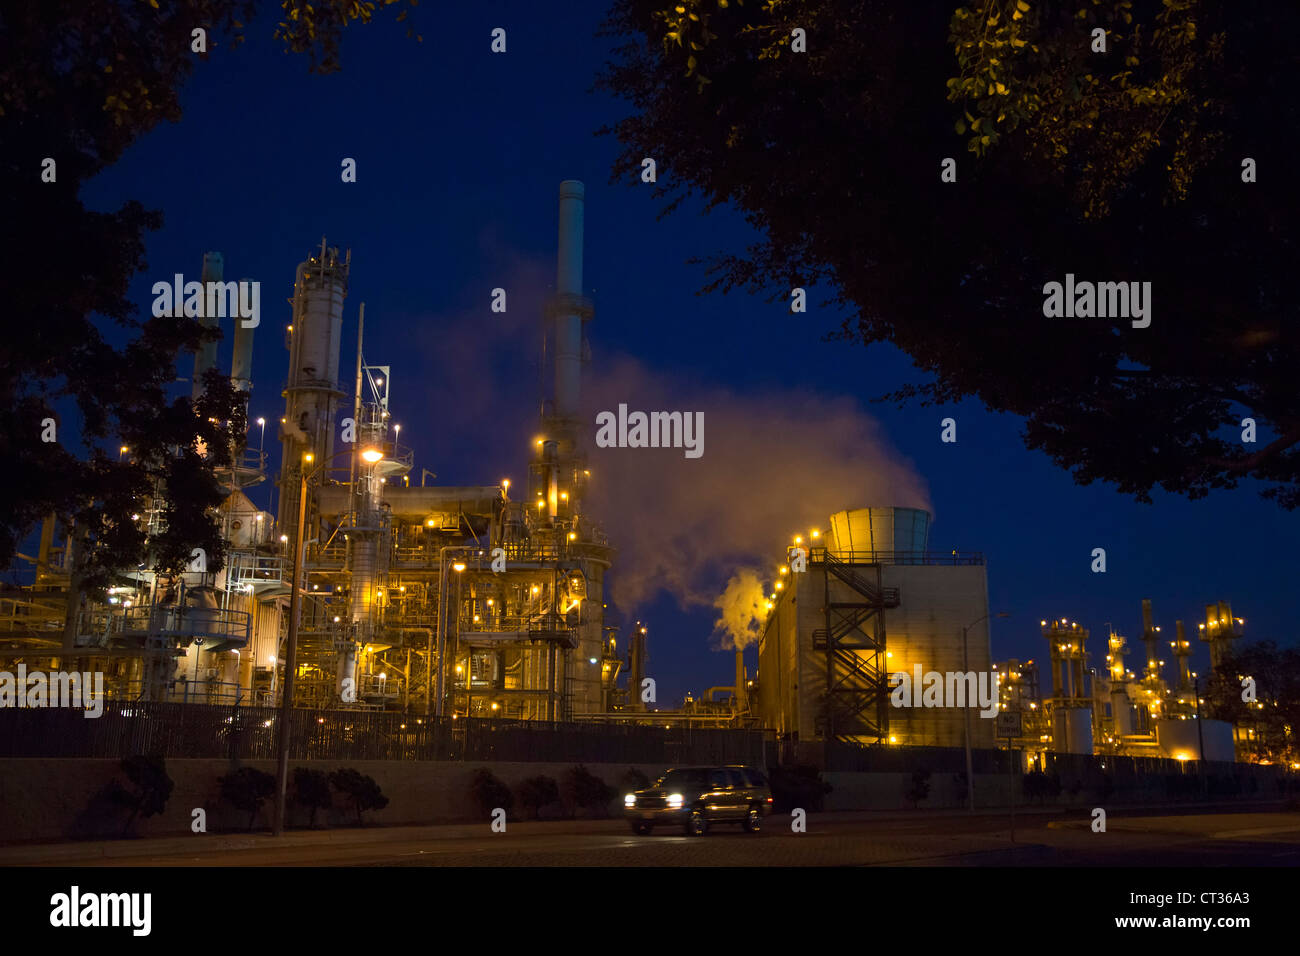 Wilmington, California - An oil refinery, operated by BP. Stock Photo